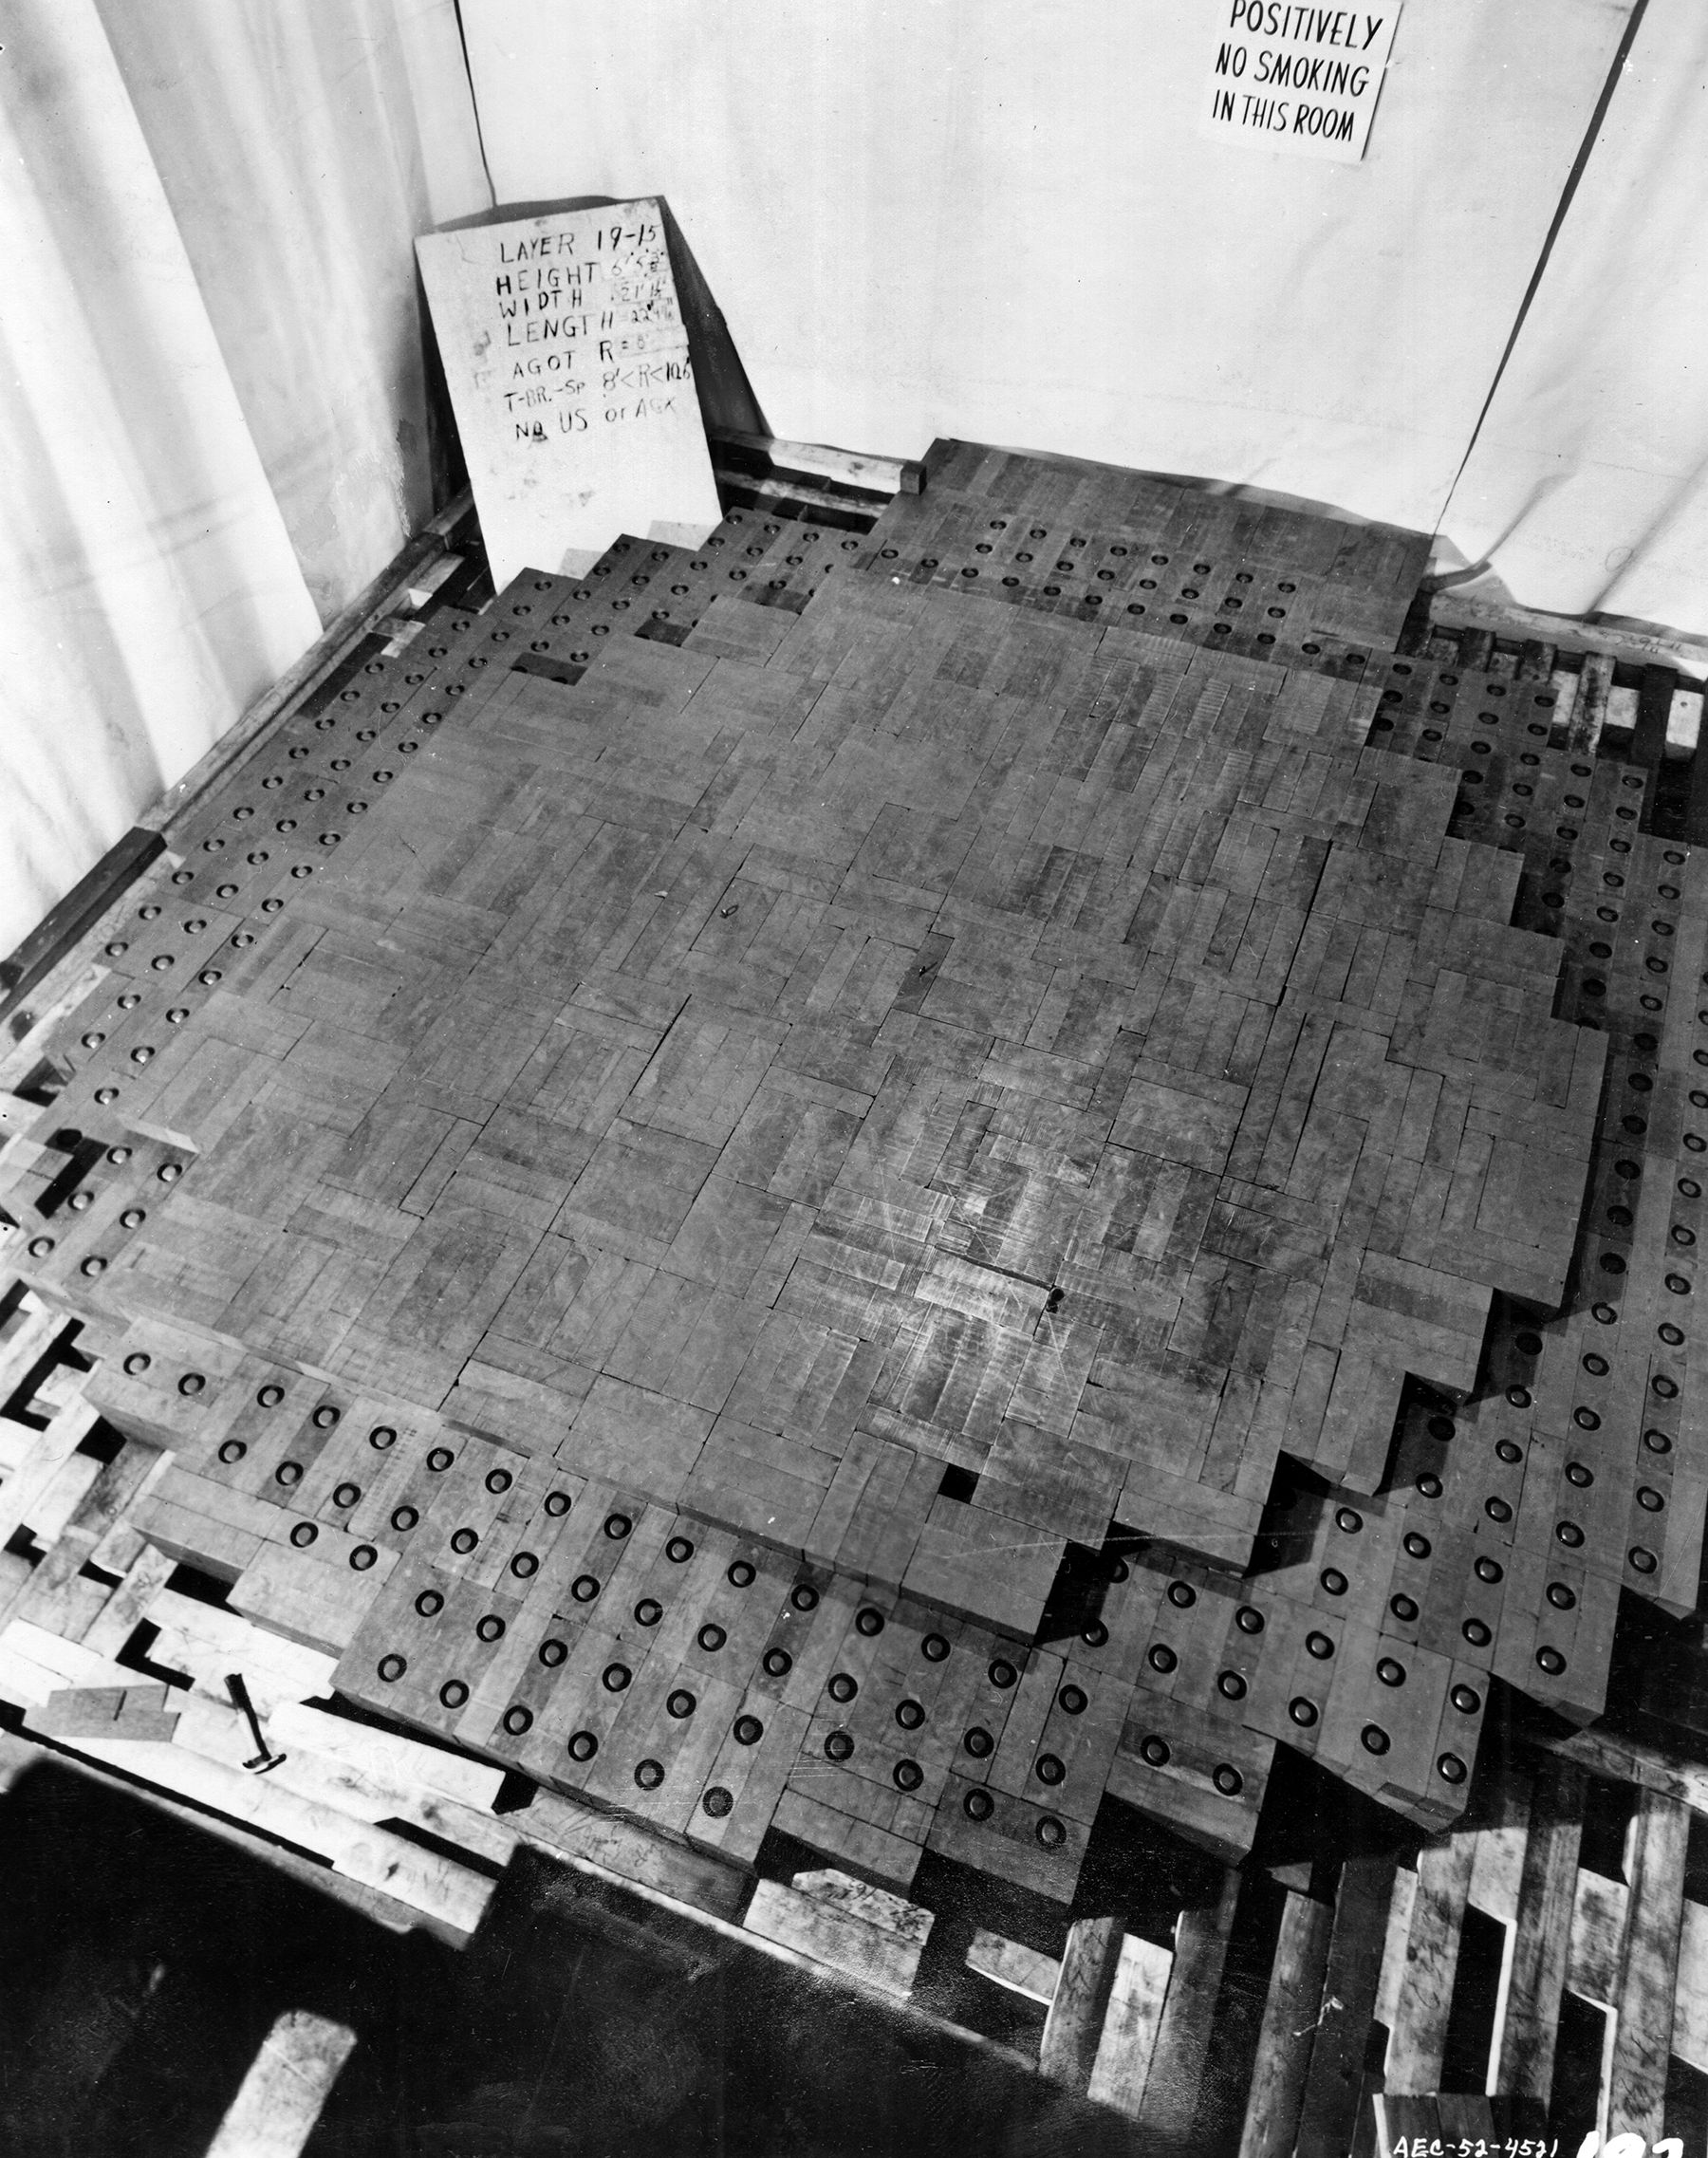 Chicago Pile-1, consisting of blocks of graphite containing uranium oxide, is shown under construction at the University of Chicago. Intended to help prevent the loss of neutrons, the Goodyear balloon cloth draping shown at left and to the rear proved unnecessary during the process that generated the historic nuclear chain reaction.